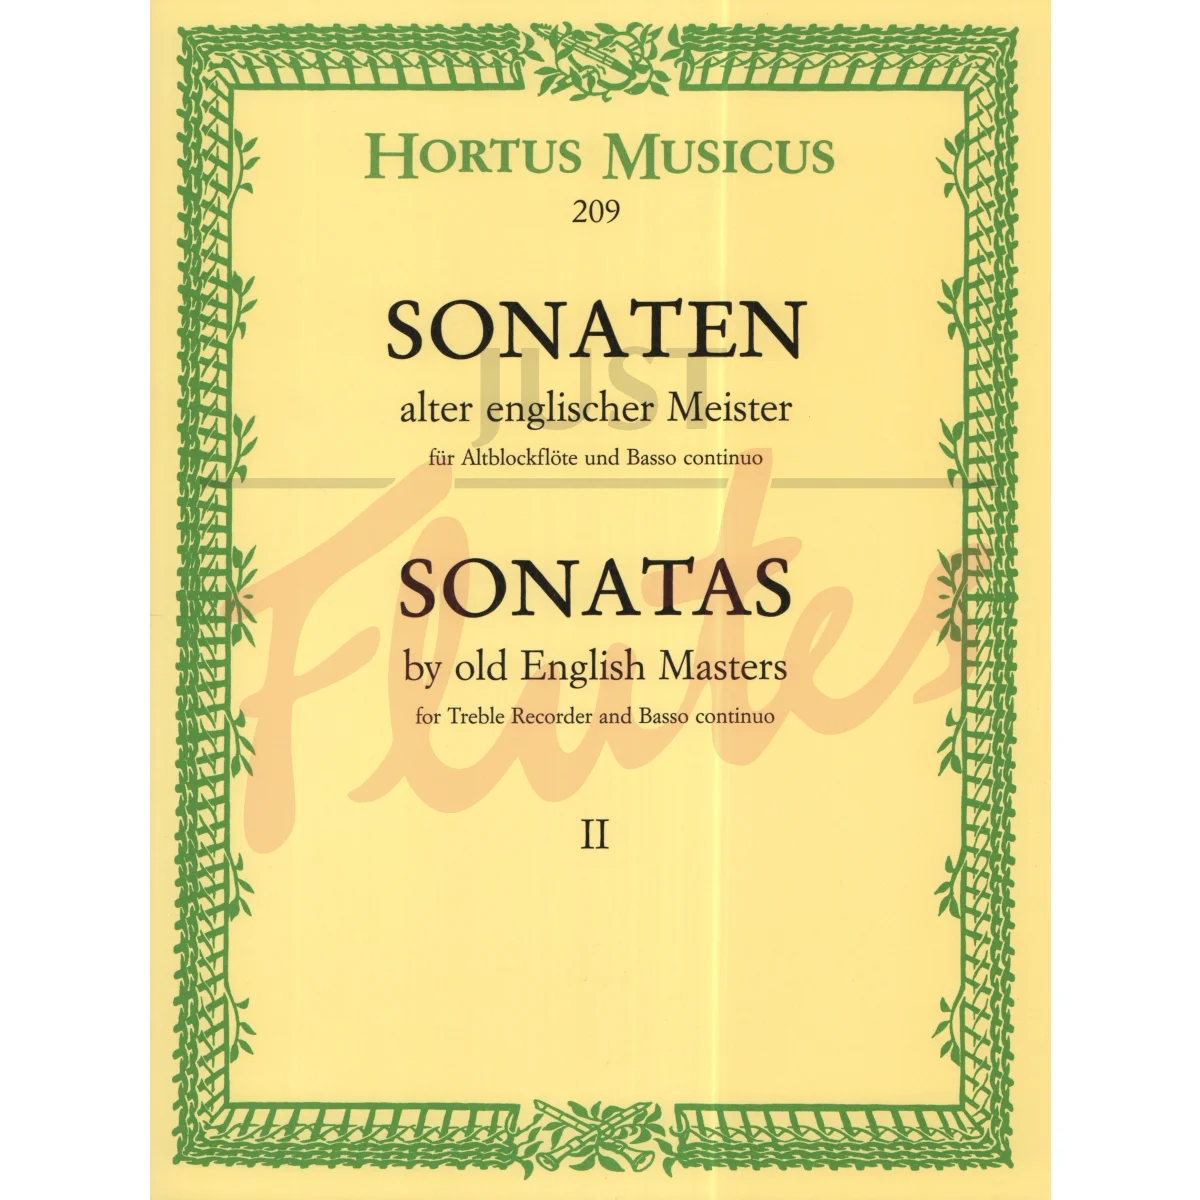 Sonatas by Old English Masters for Treble Recorder and Basso Continuo